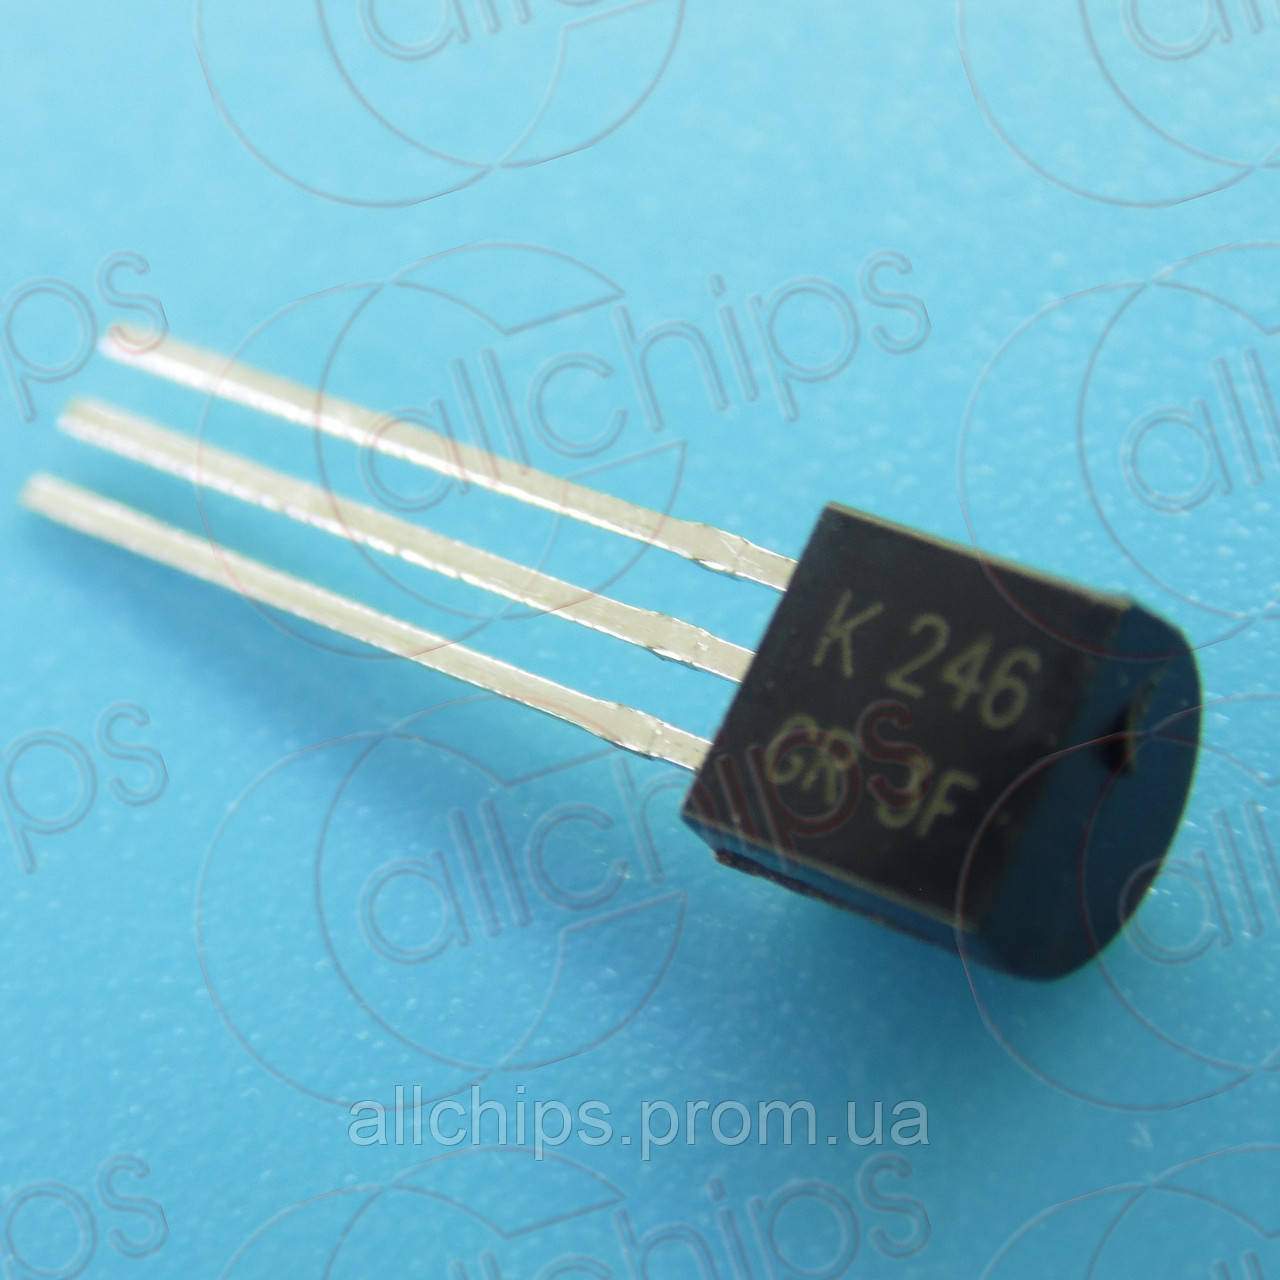 MOSFET N-канала 50В 10мА Toshiba 2SK246 TO92 - фото 2 - id-p1388499017